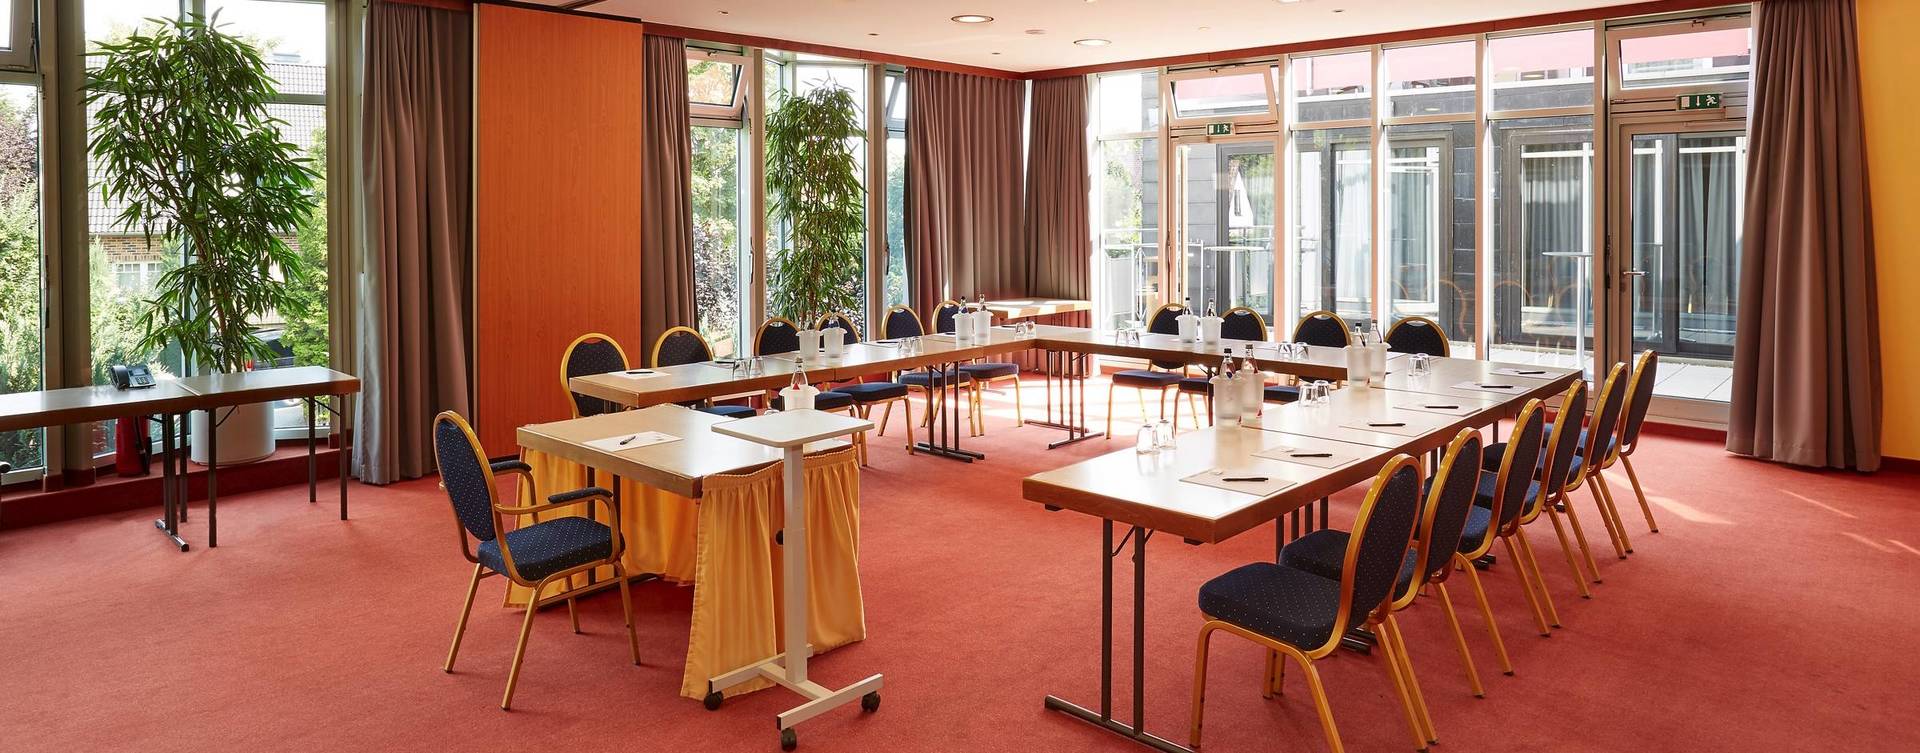 Fully equipped meeting rooms at the H+ Hotel Goslar - Official website